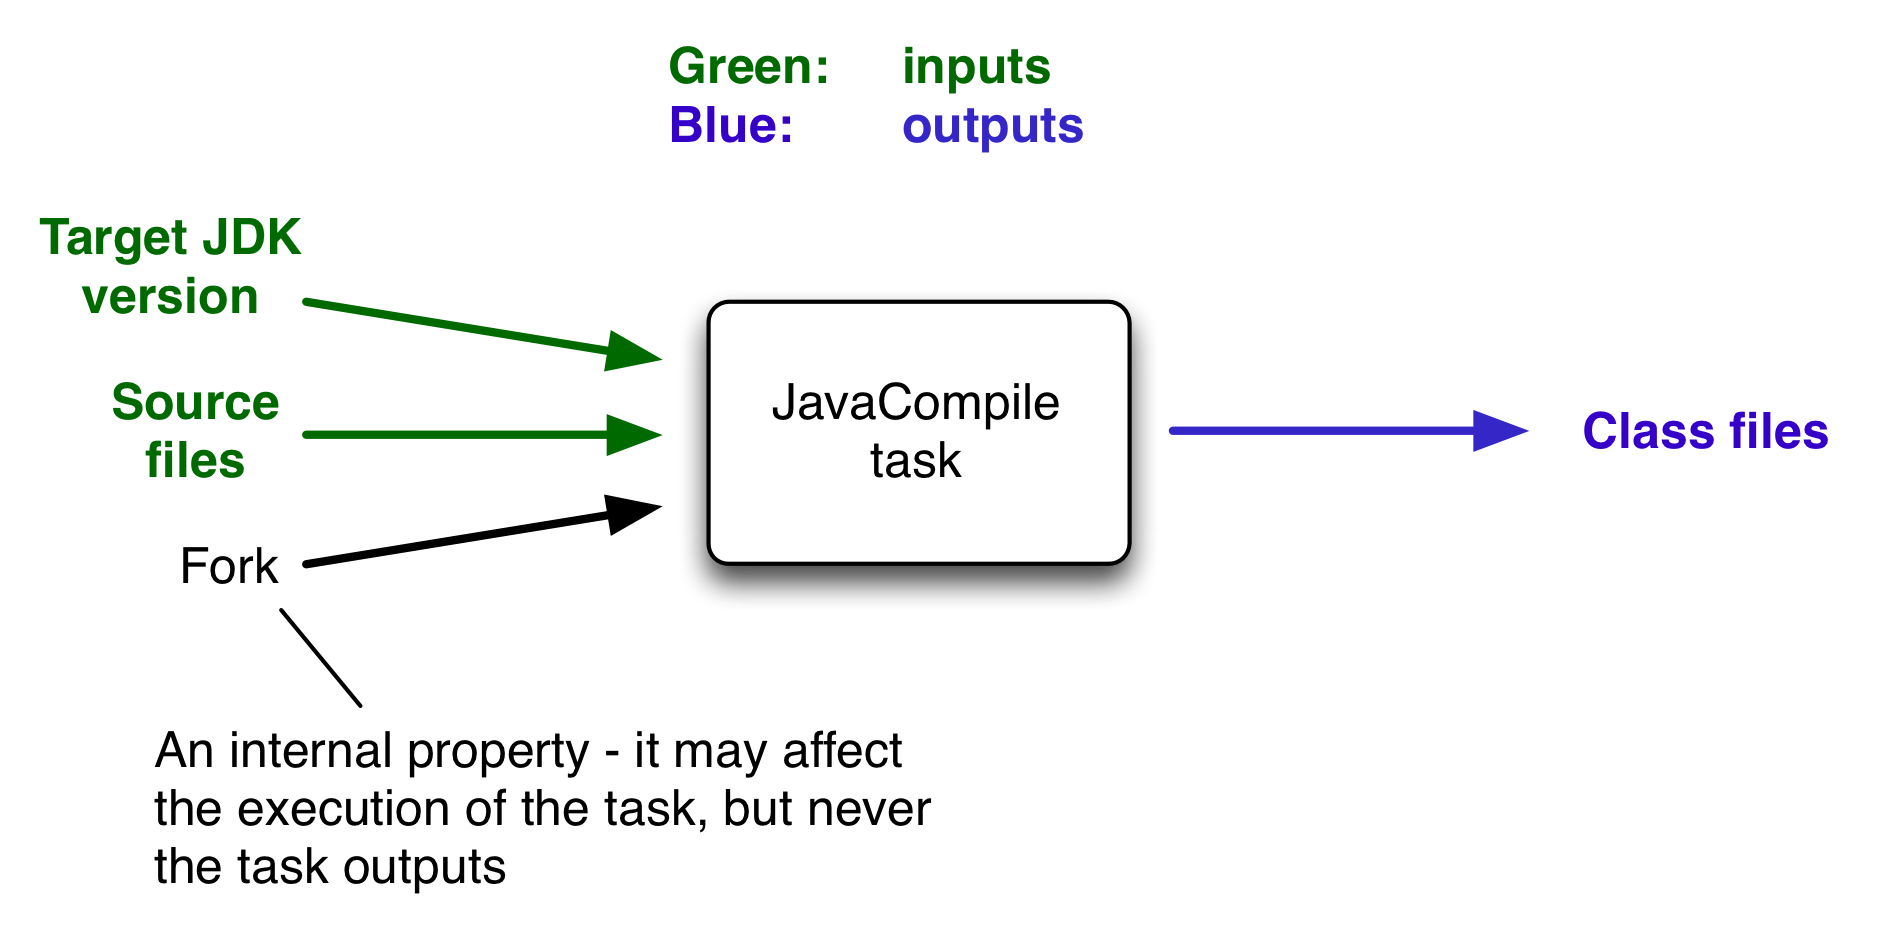 Example task inputs and outputs